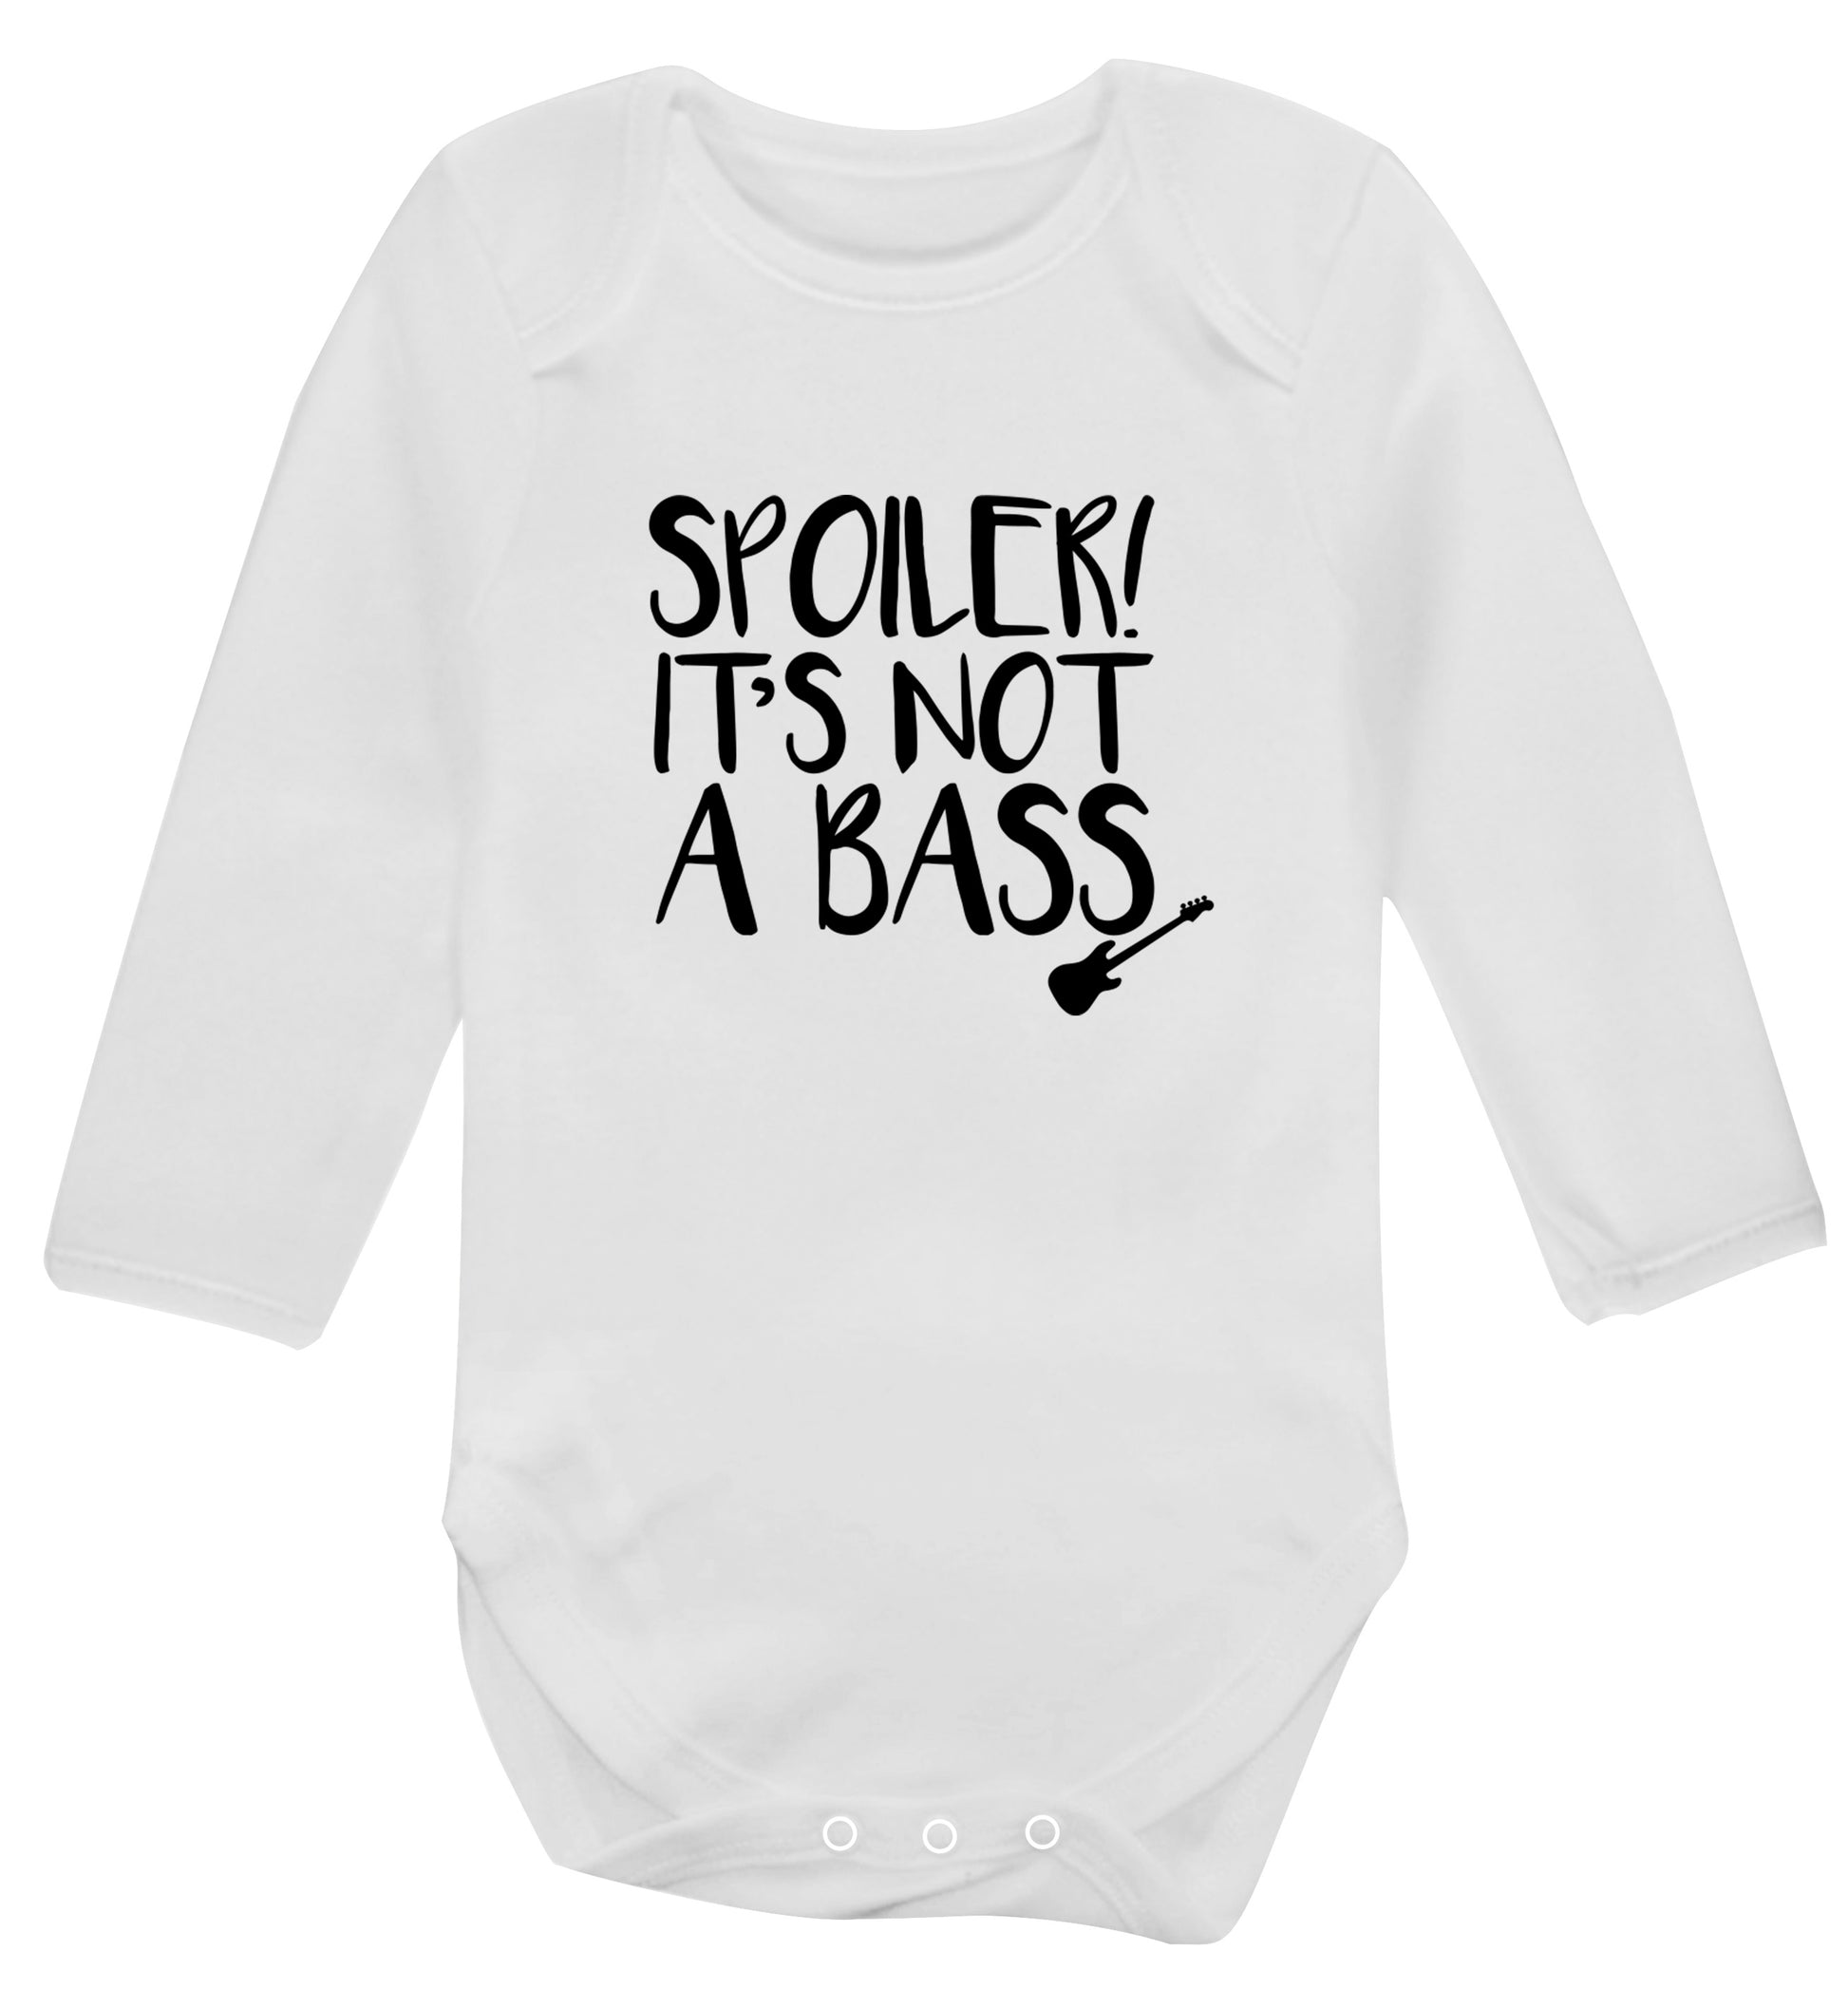 Spoiler it's not a bass Baby Vest long sleeved white 6-12 months